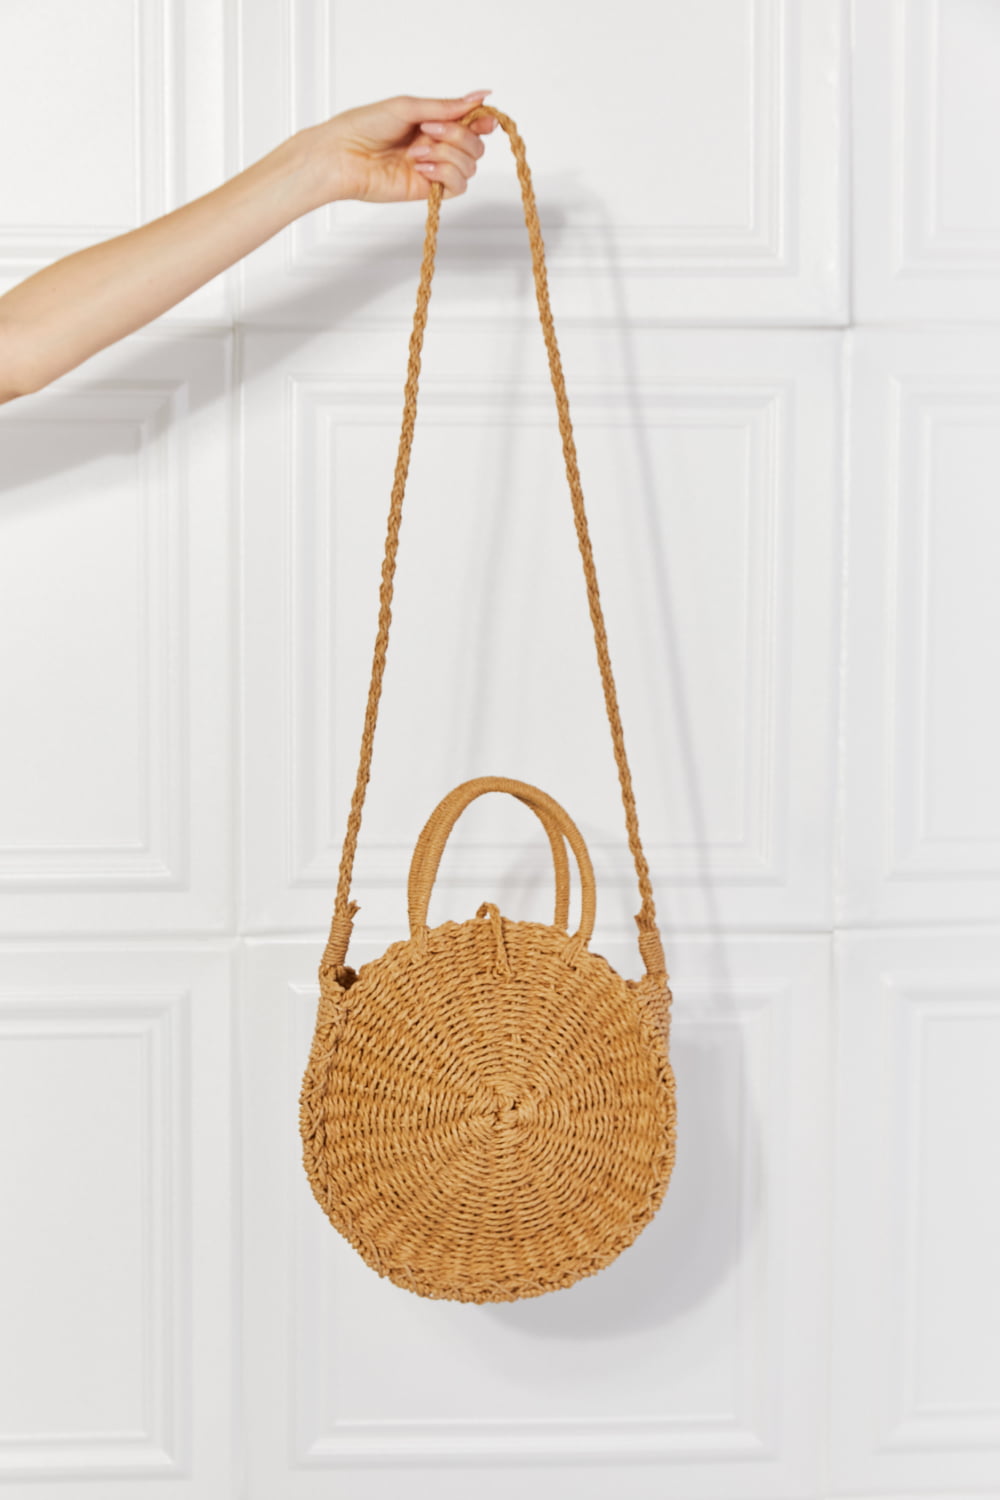 Buy KRYSTAL Women Round Rattan Bag for Women Straw Bag Handwoven Beach  Bohemian Shoulder Purse Embroidered Sunflower Woven (8 * 8 * 3) Medium Size  (Multicolour) at Amazon.in